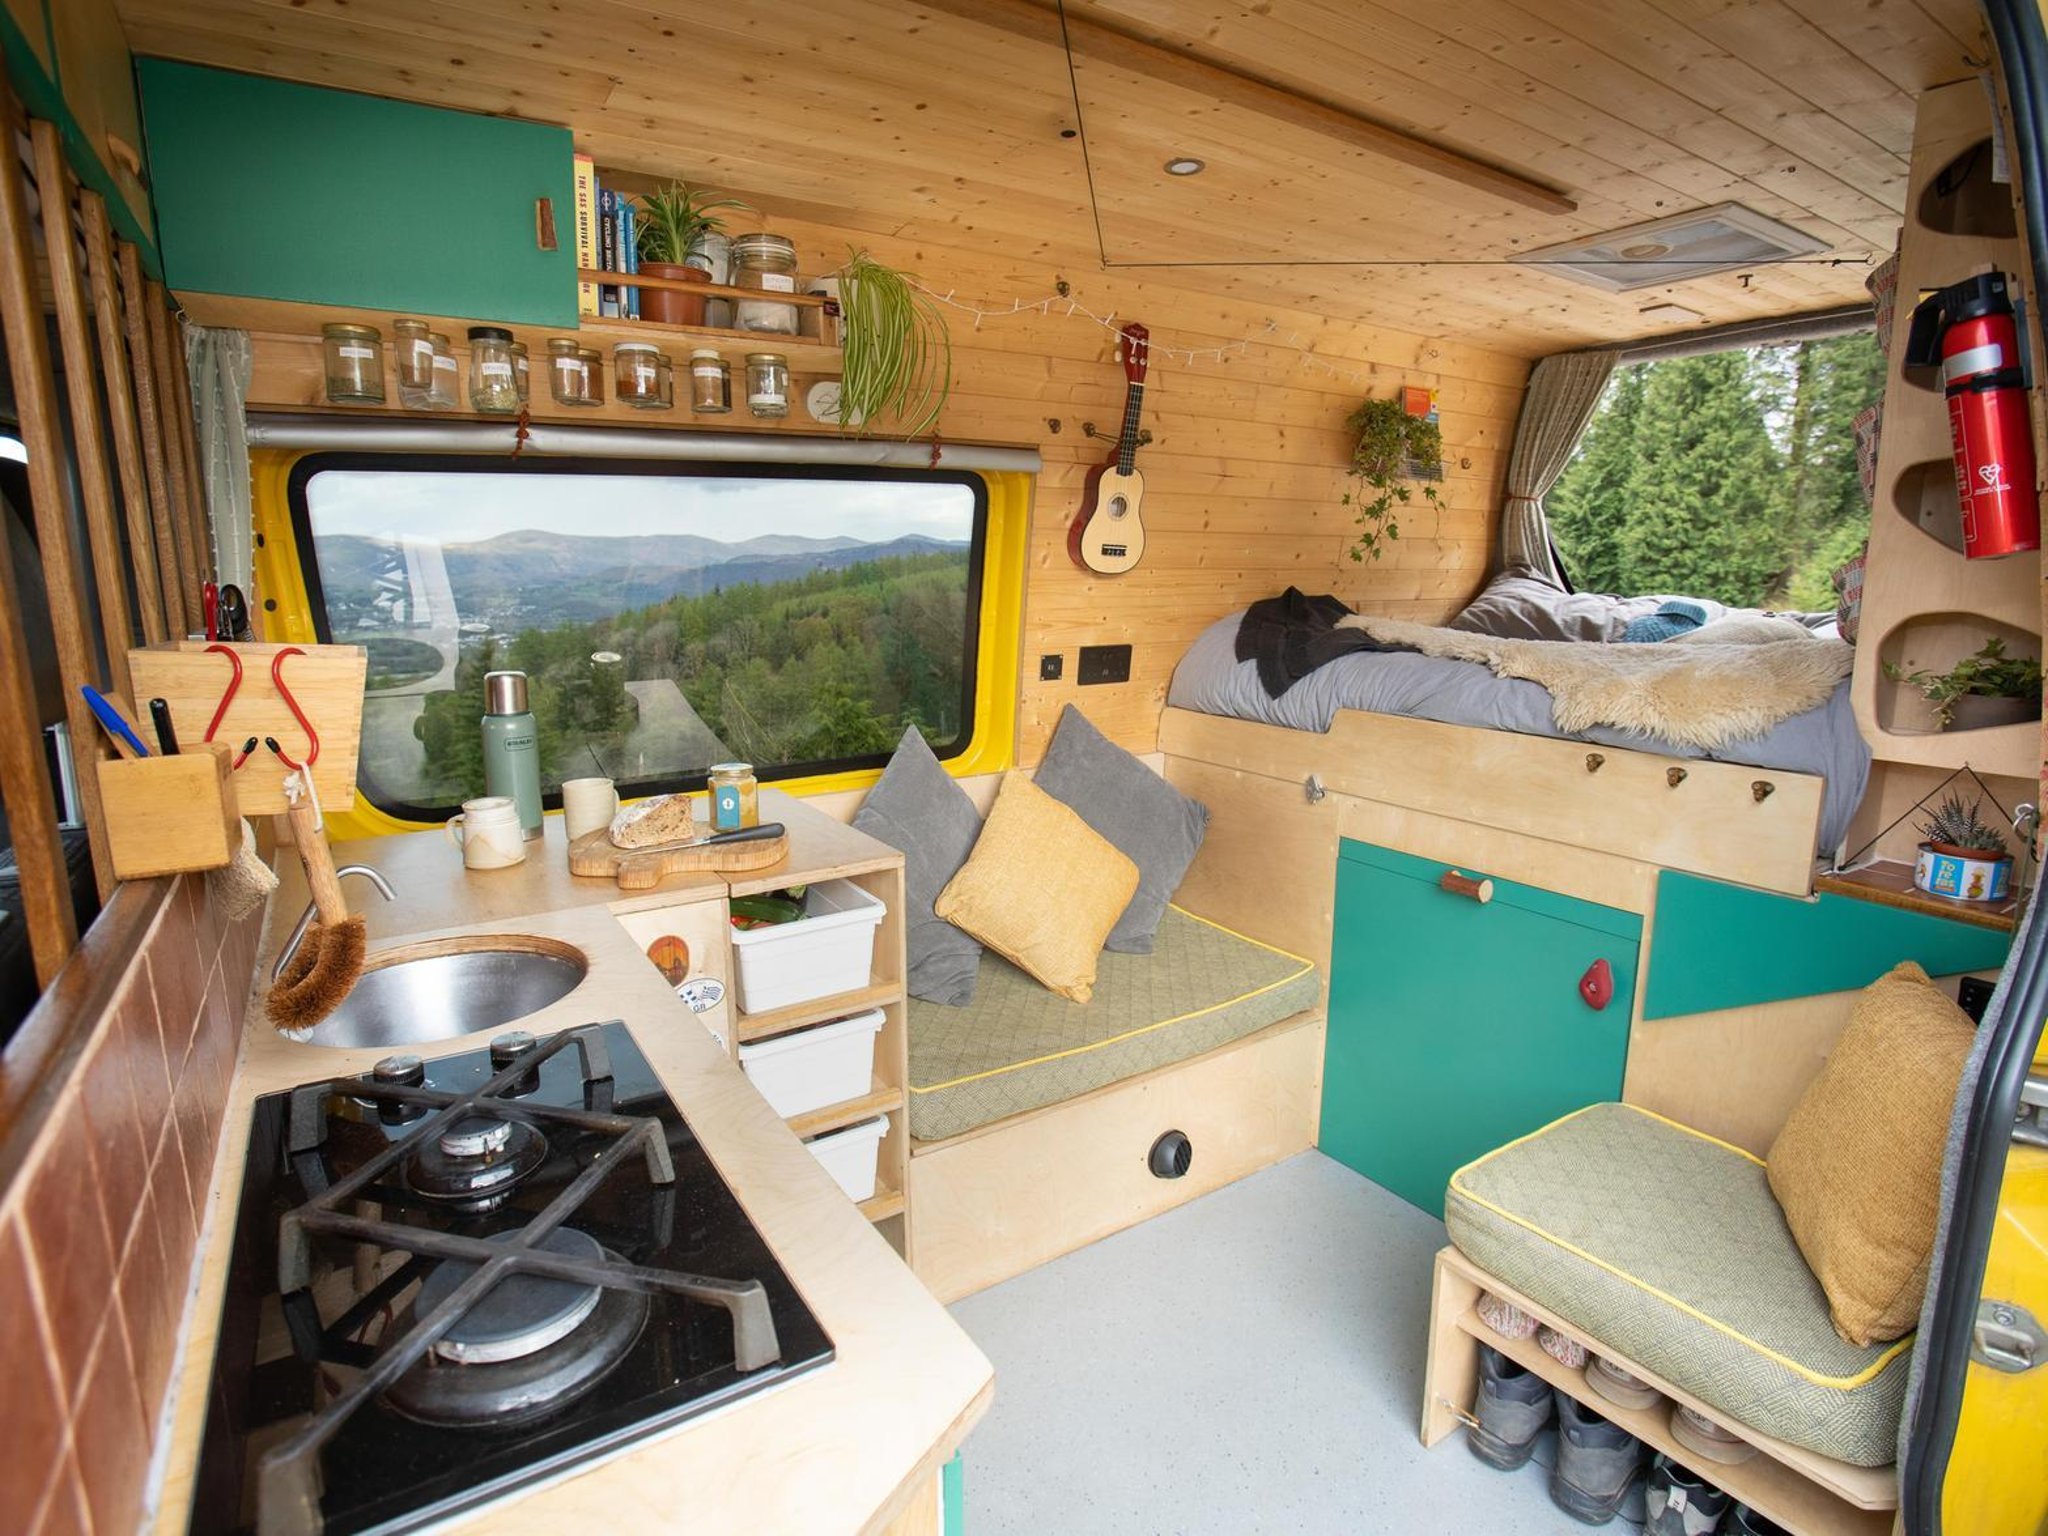 Outlook Zelfgenoegzaamheid Machtig Take a look inside this DIY camper van conversion that sparked a new  business | Yorkshire Post